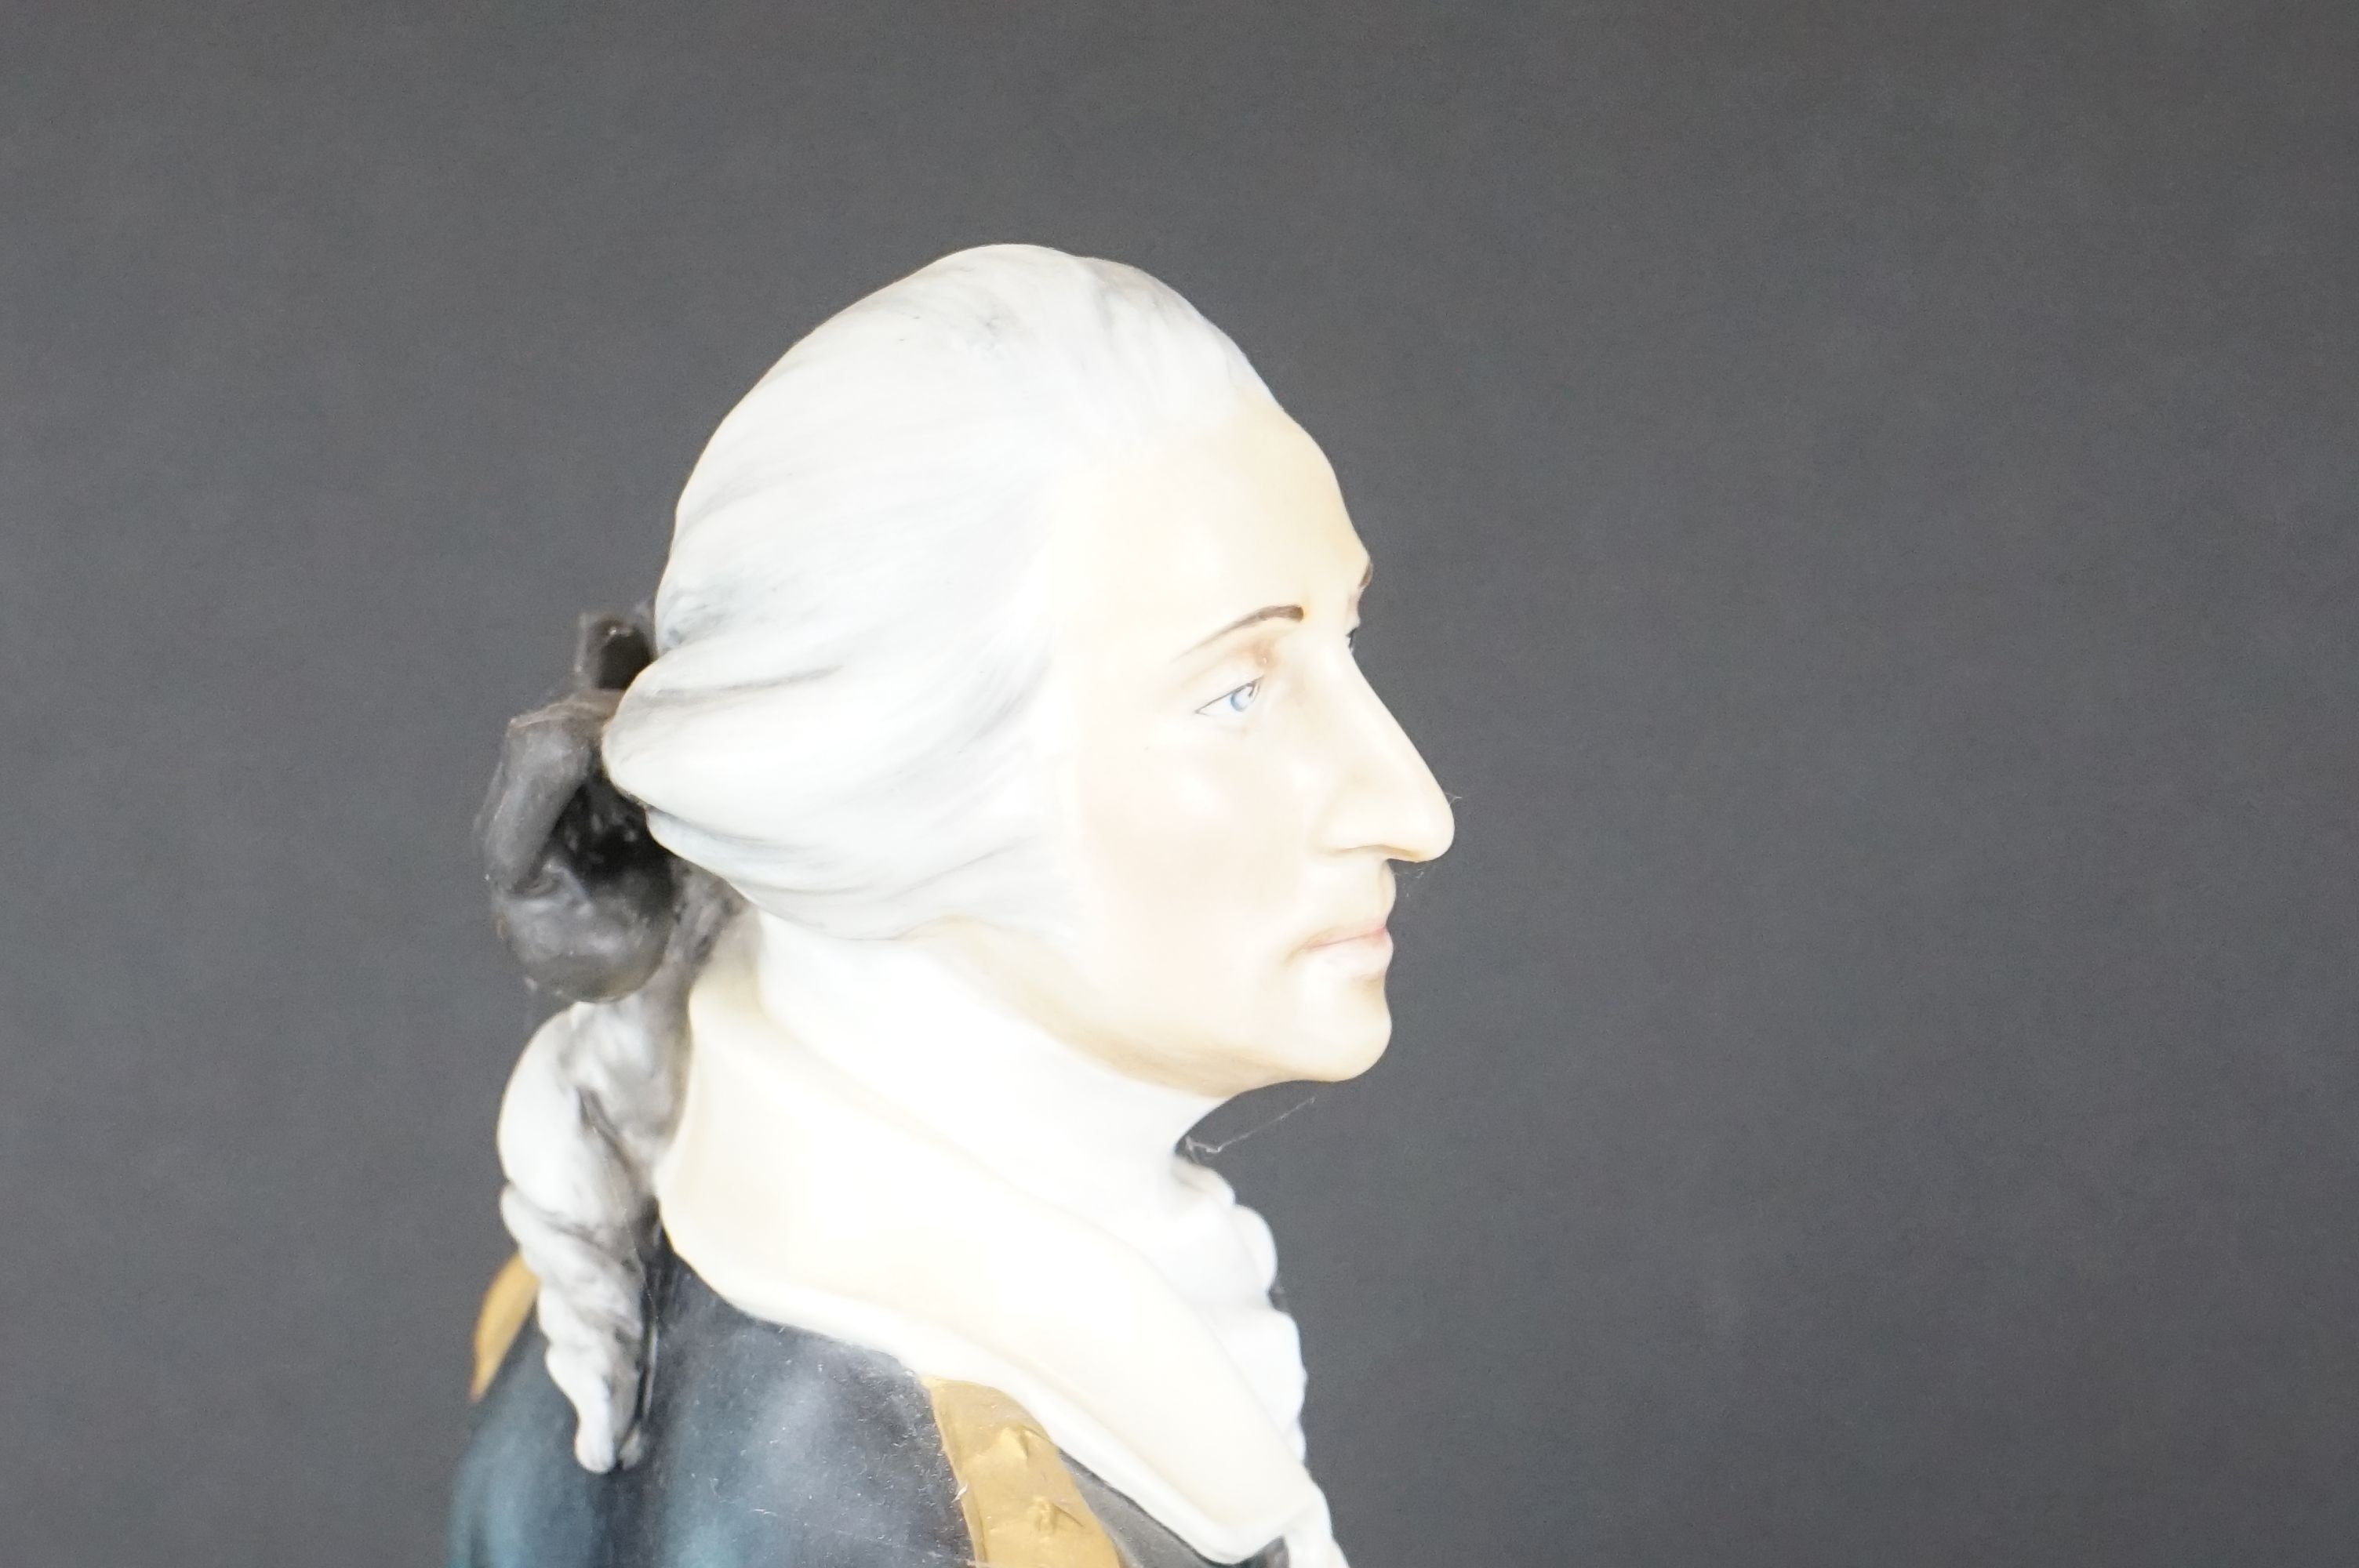 Royal Worcester Ceramic model of ' Washington ' from the Famous Military Commanders series model - Image 3 of 7